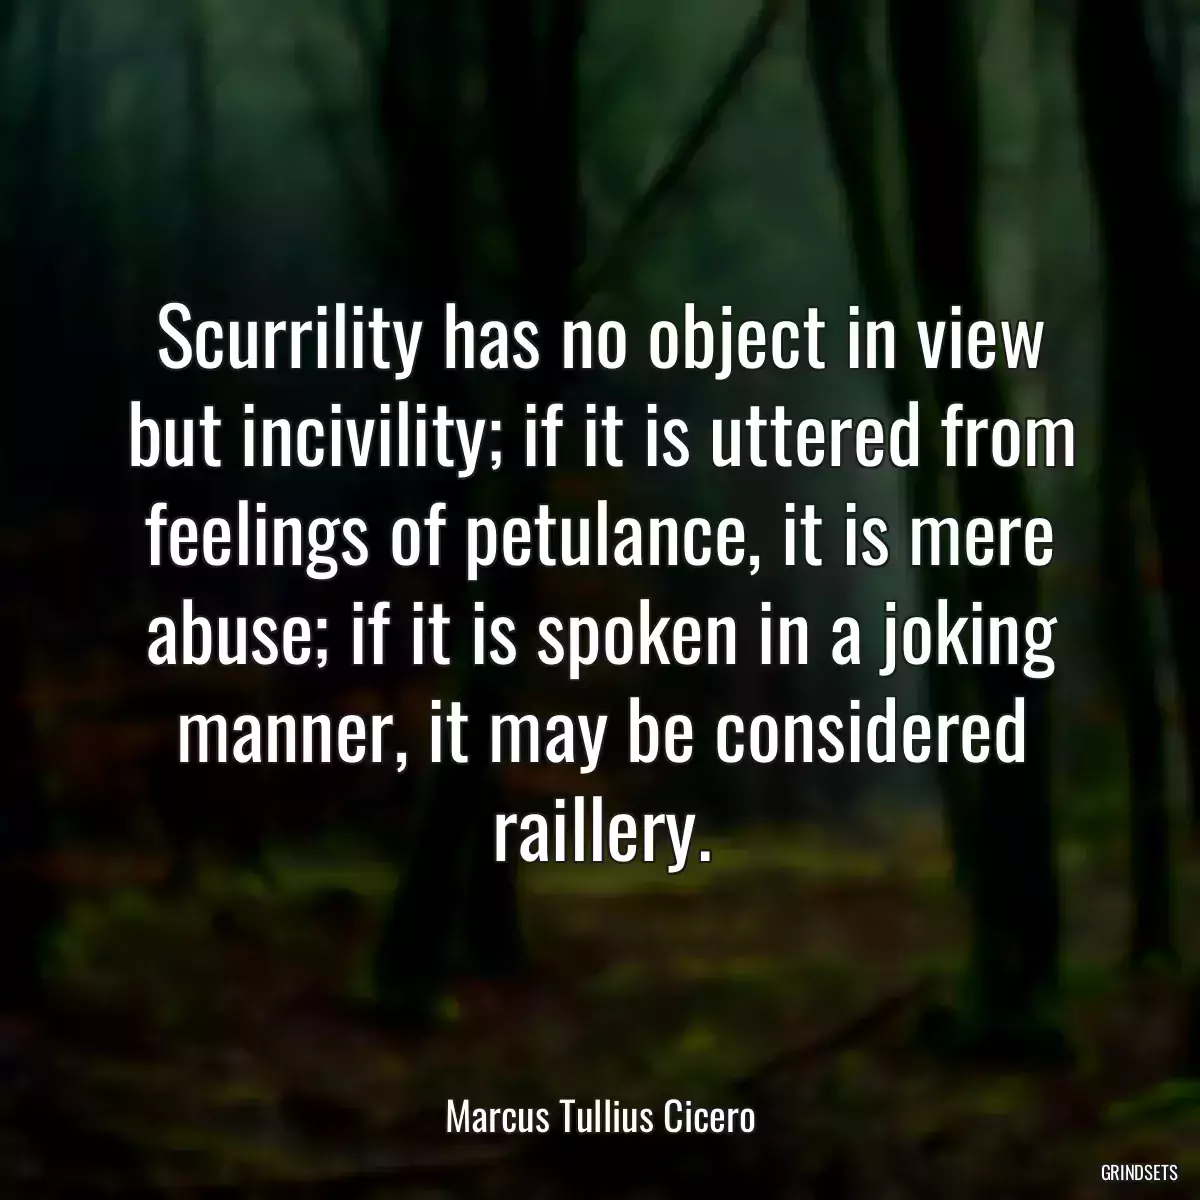 Scurrility has no object in view but incivility; if it is uttered from feelings of petulance, it is mere abuse; if it is spoken in a joking manner, it may be considered raillery.